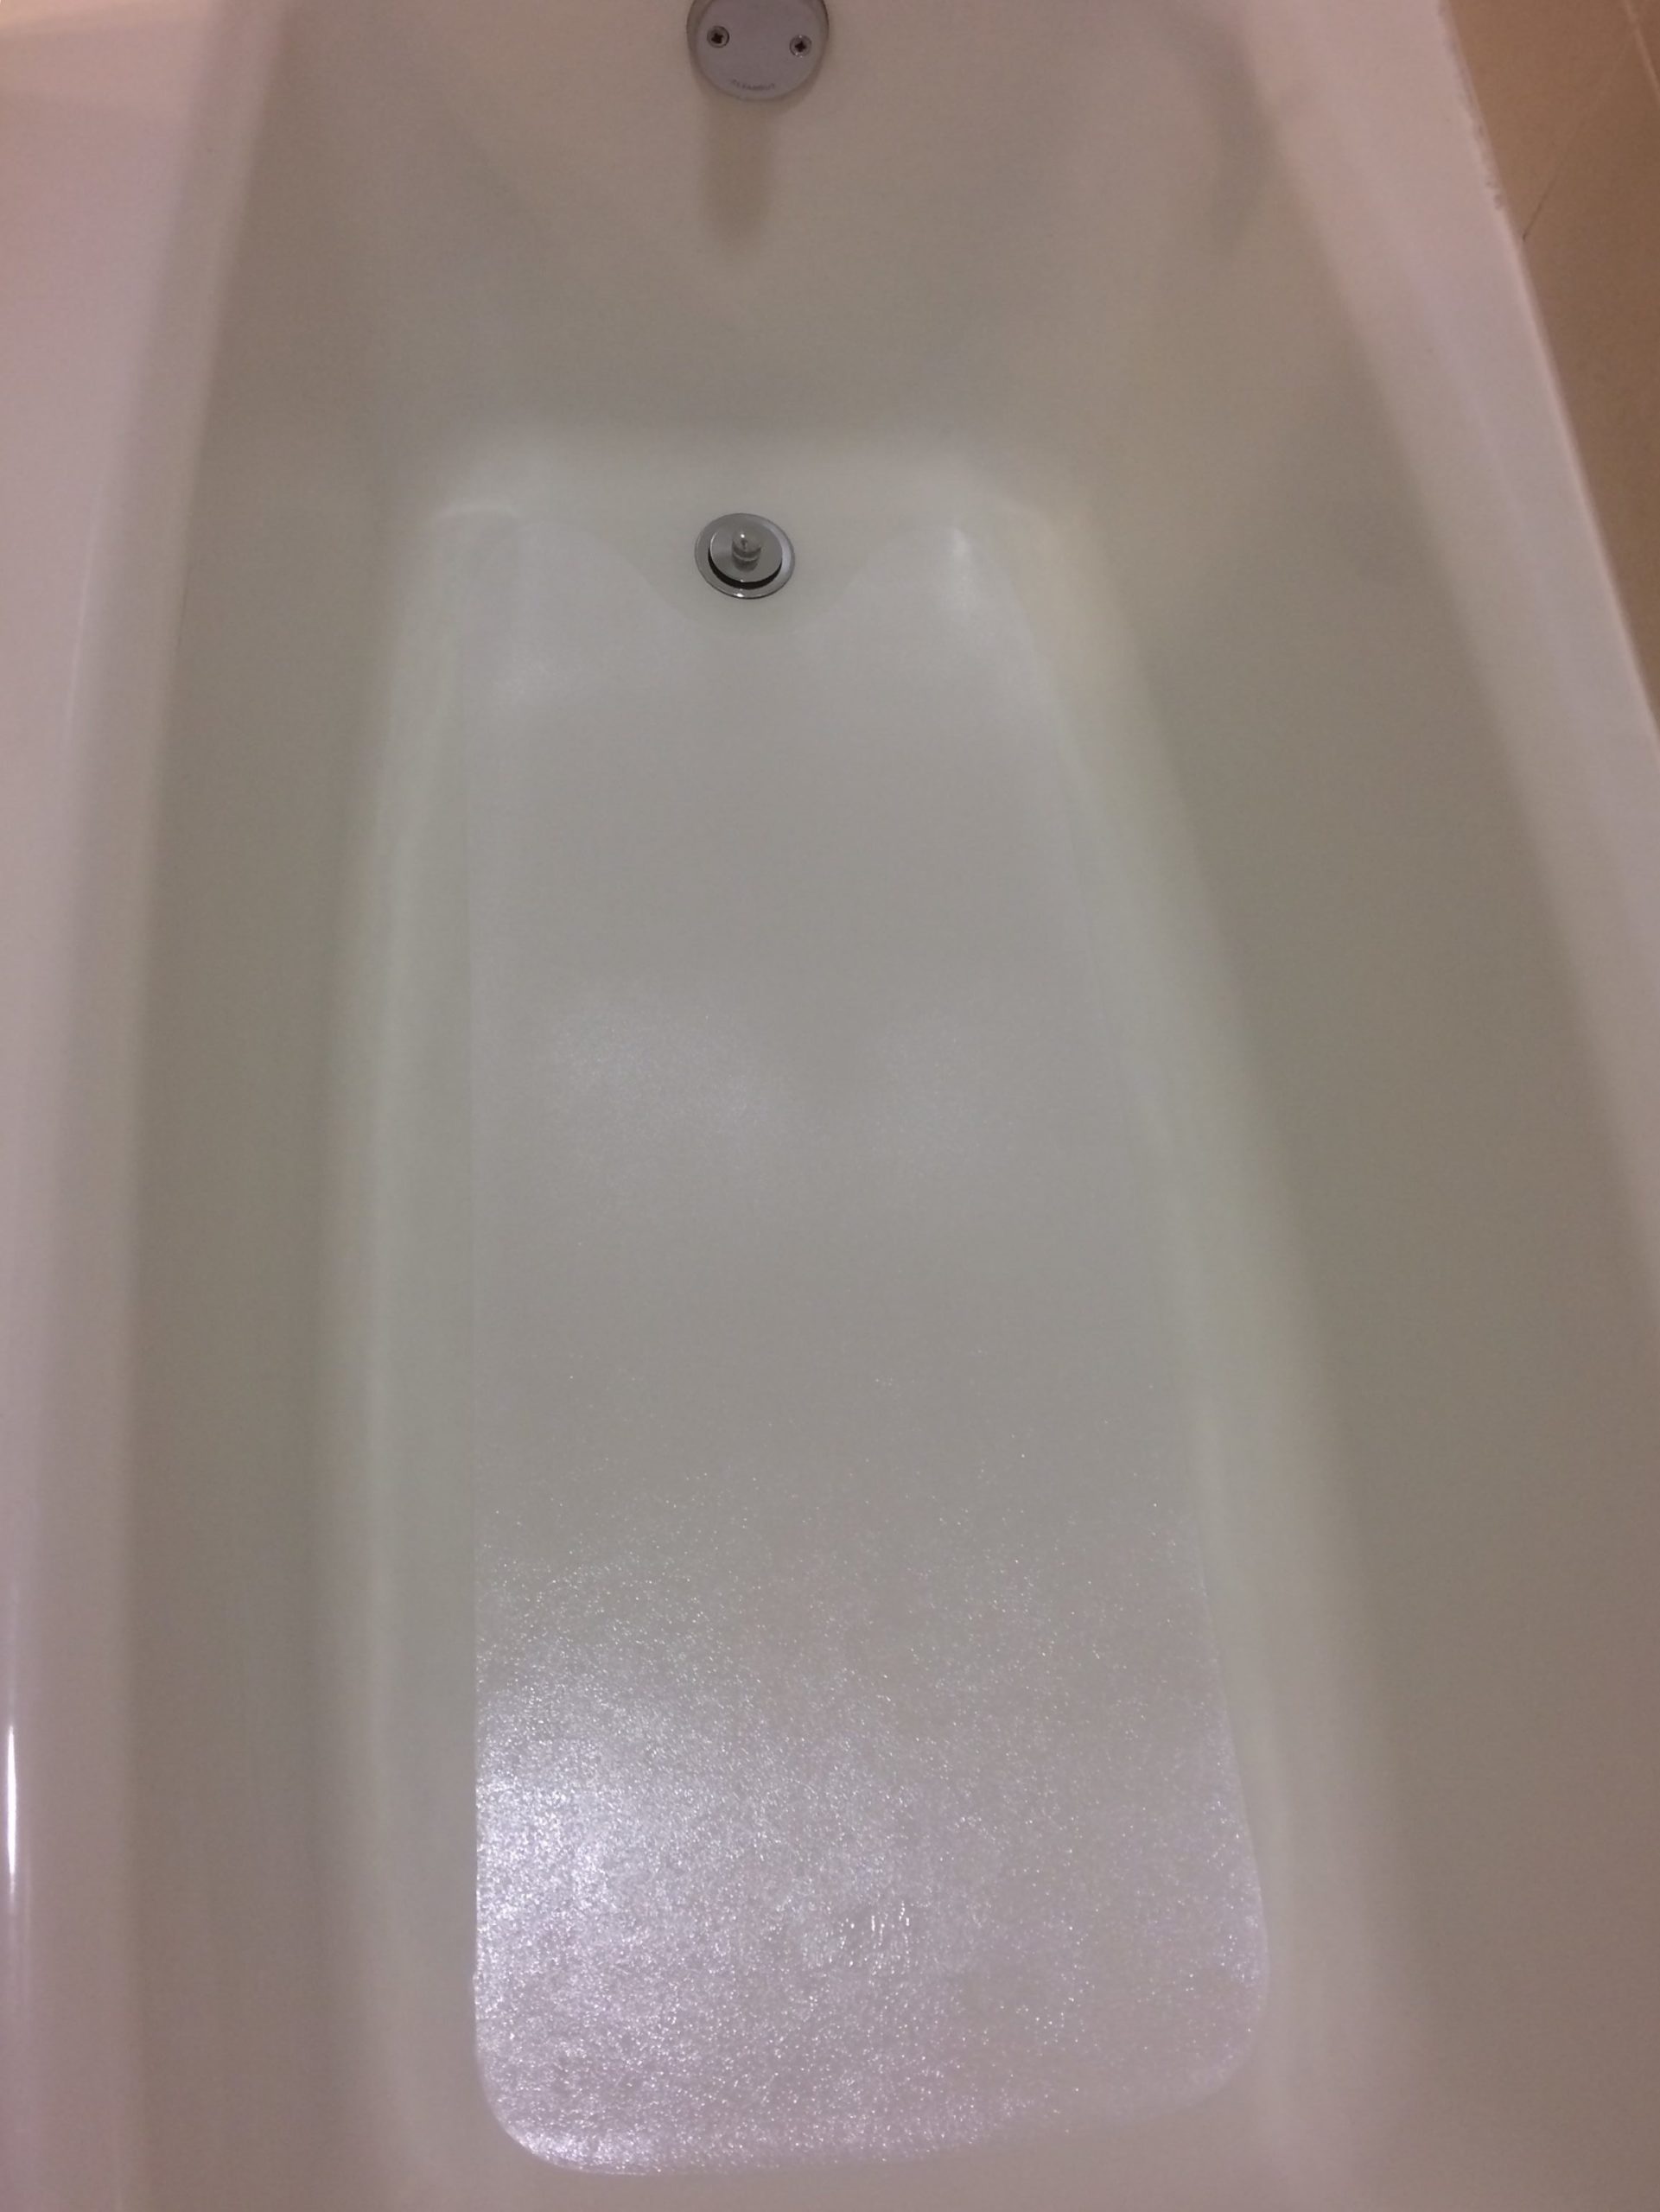 tub after